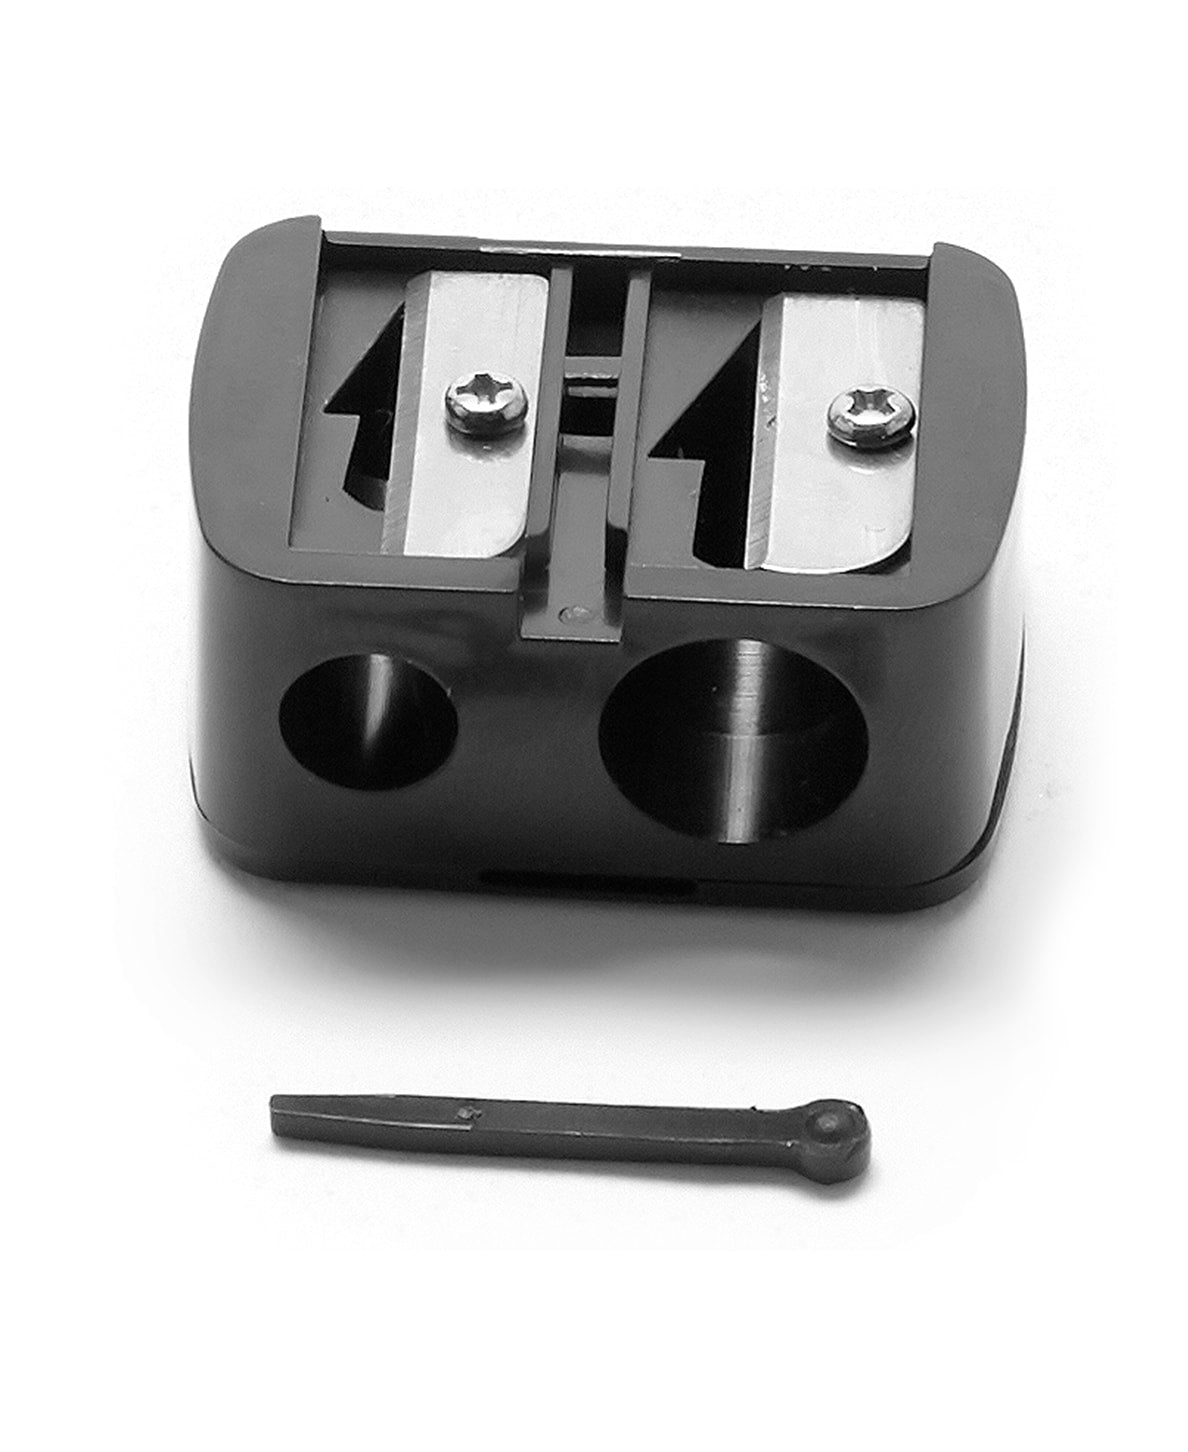 The BrowGal Pencil/Highlighter Sharpener